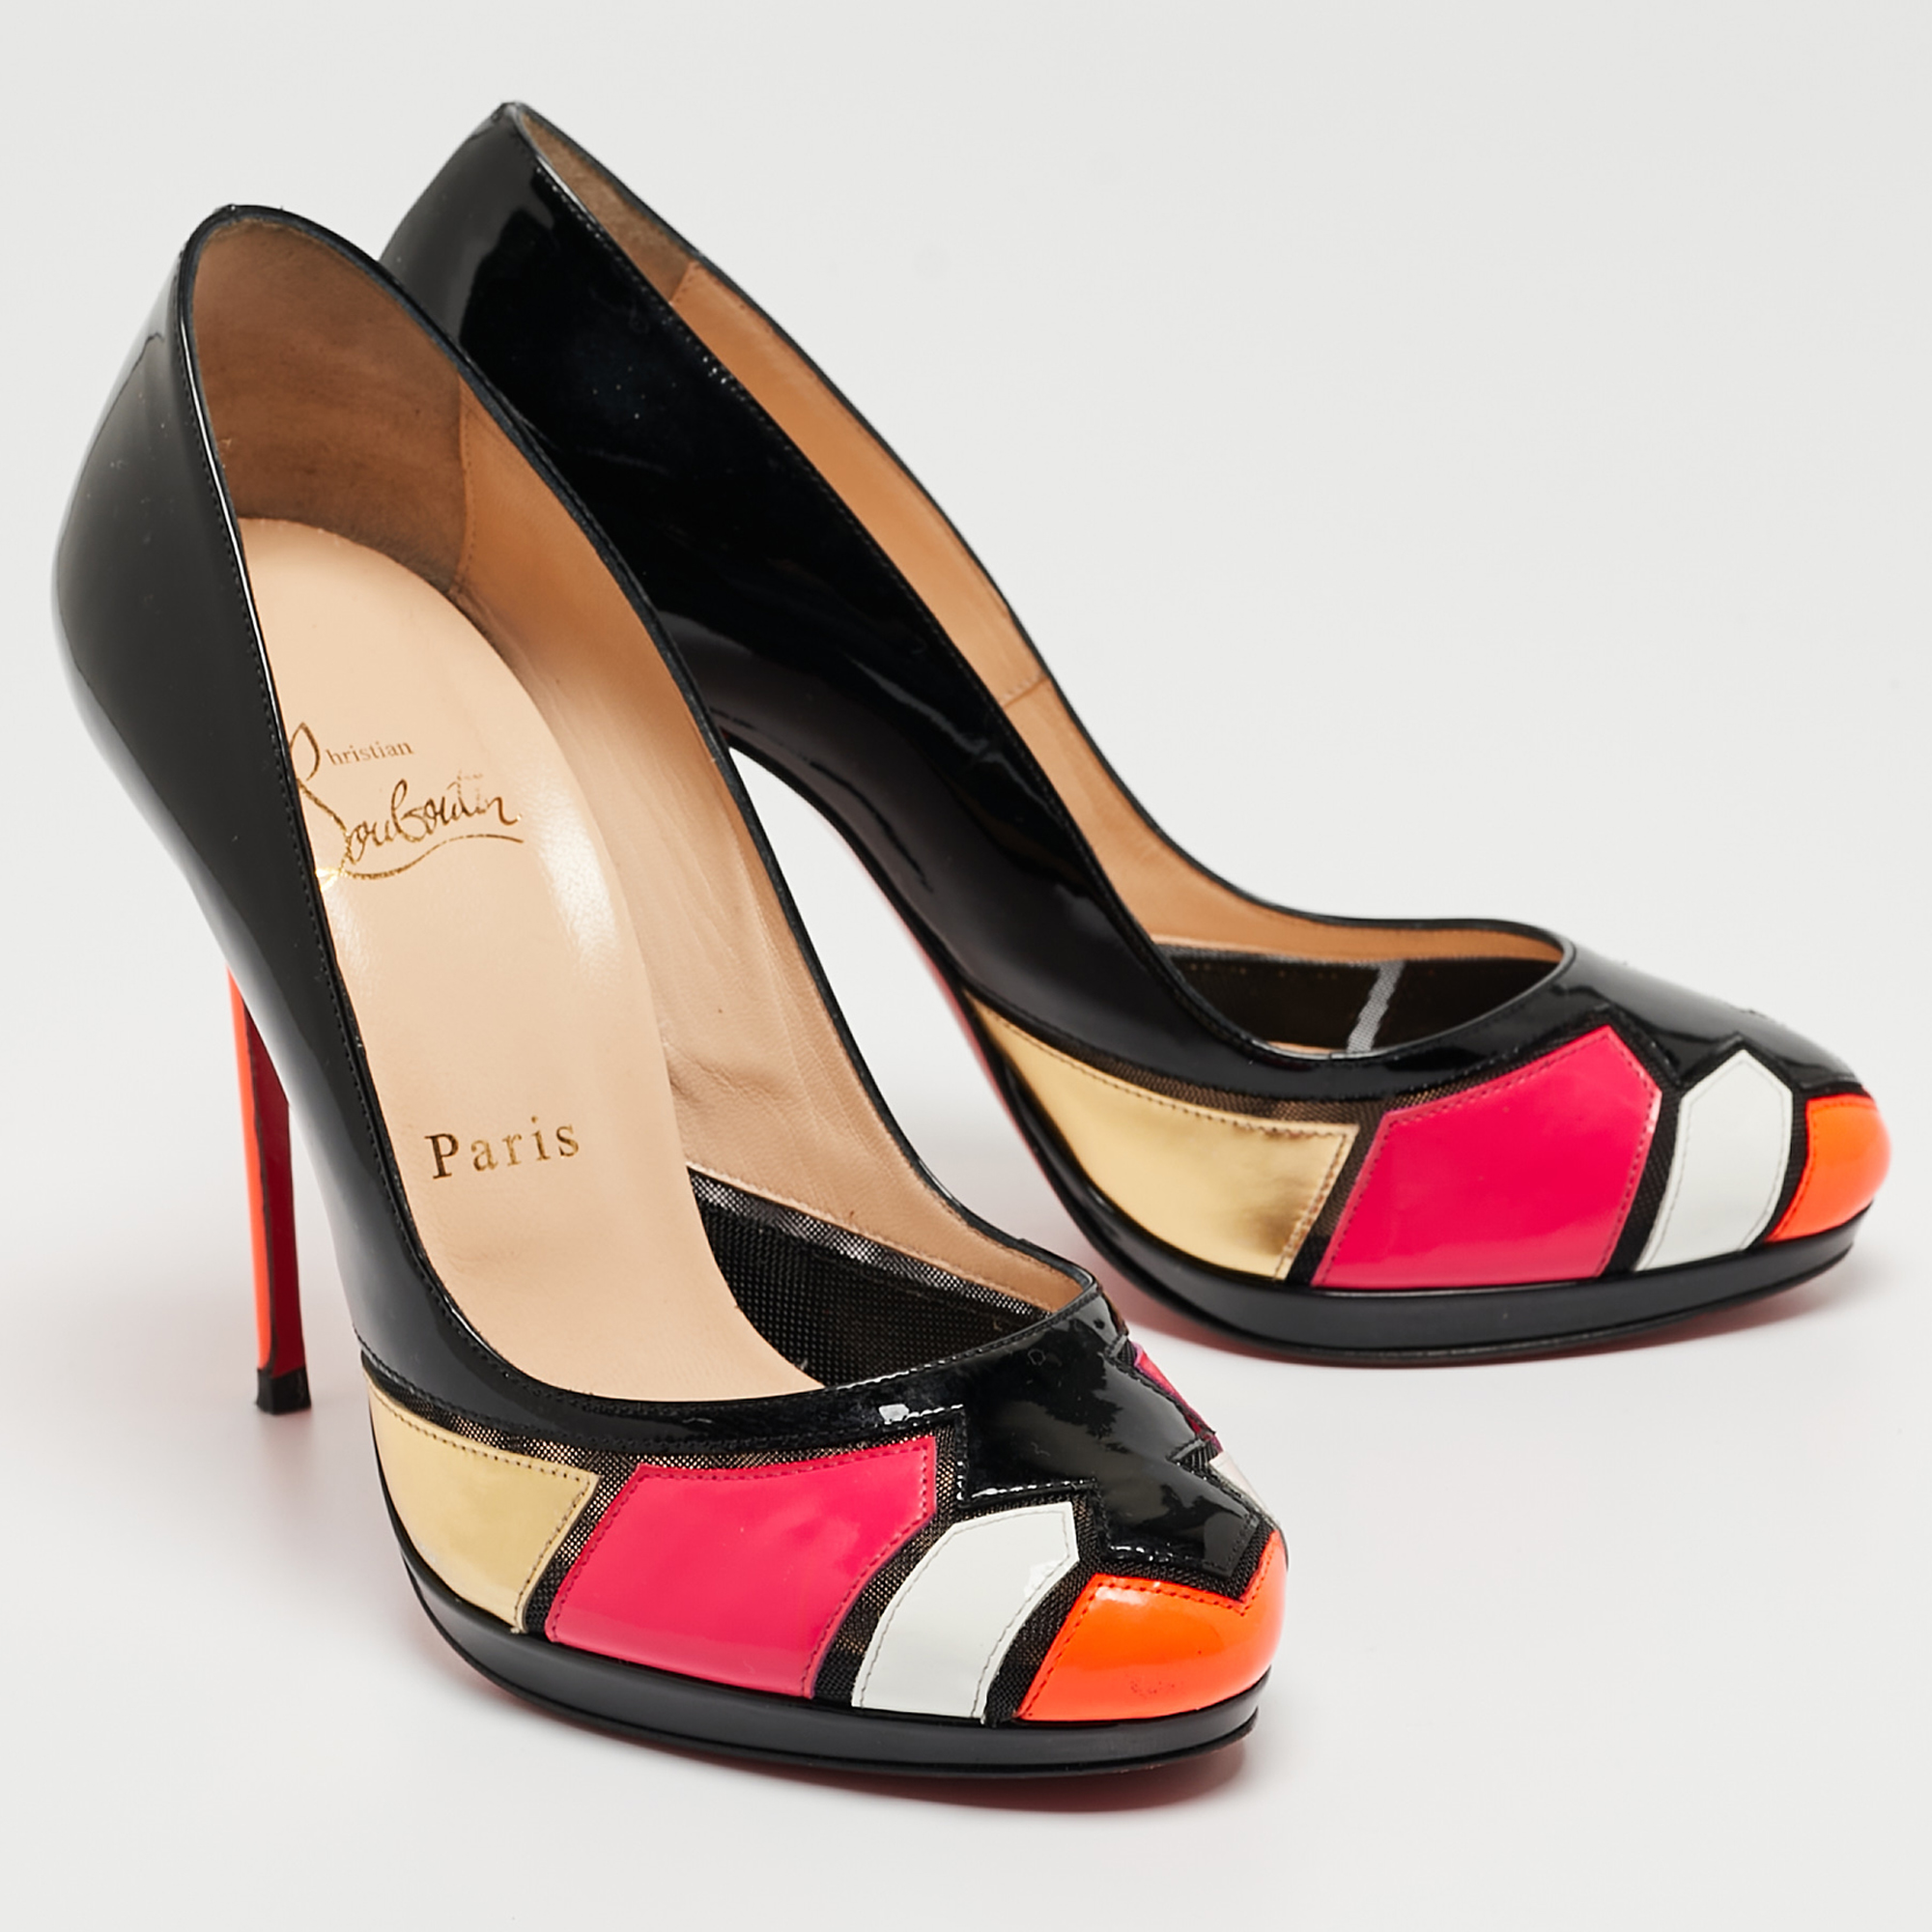 Christian Louboutin Multicolor Patent Leather Astrogirl Round Toe Pumps Size 38